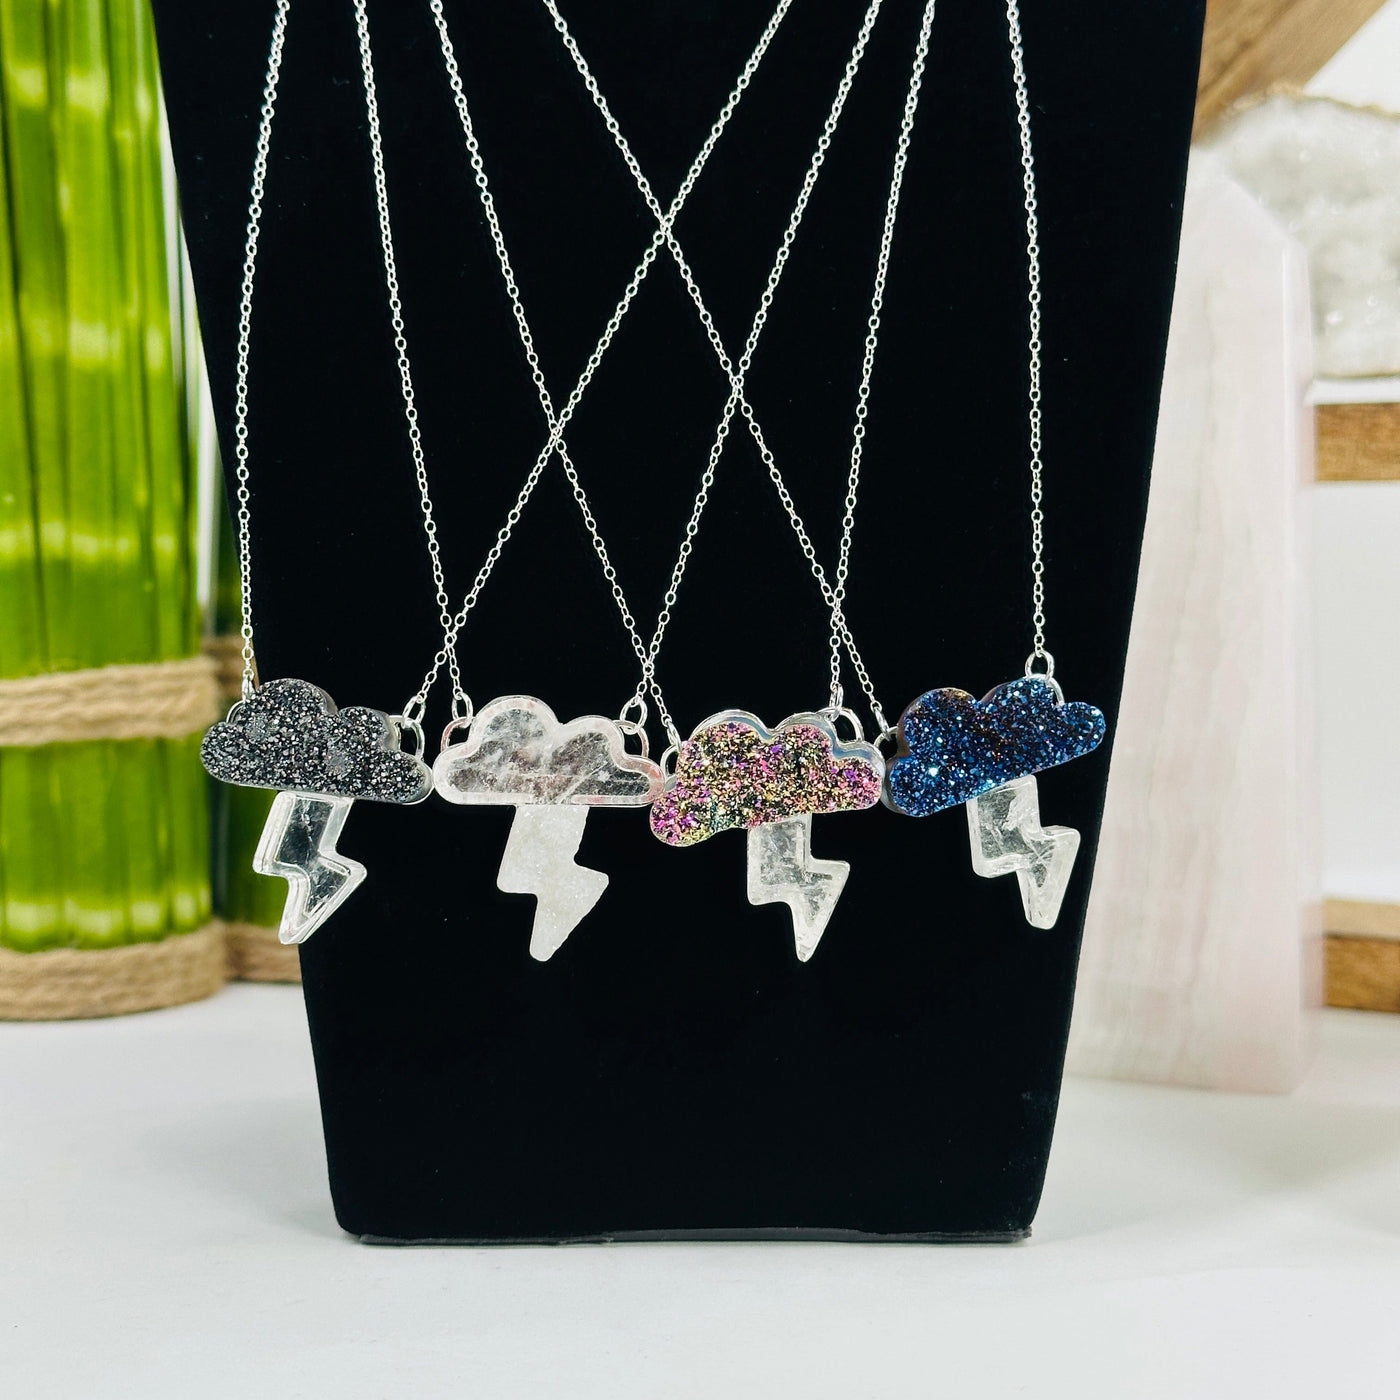 4 cloud with lightning necklaces in silver on a display